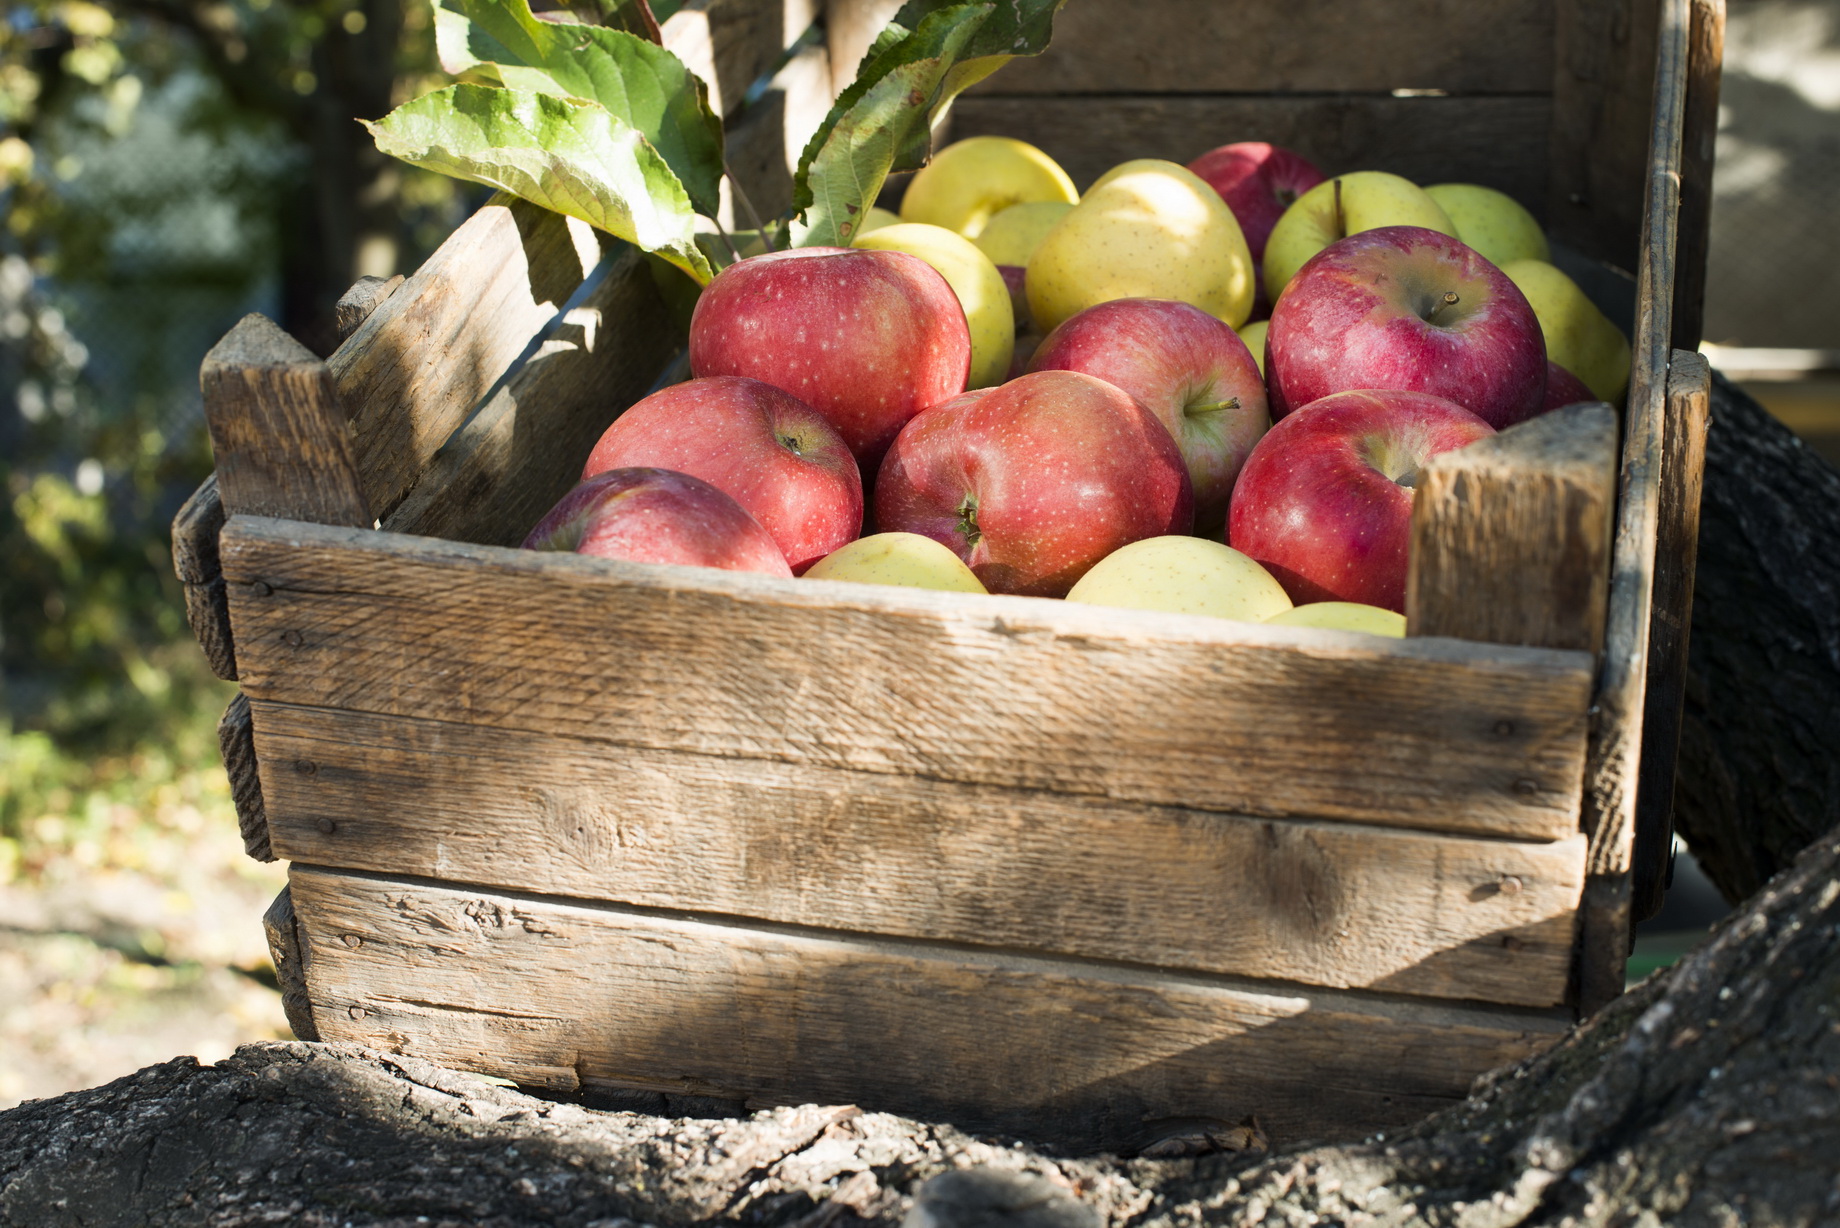 Apples,In,An,Old,Wooden,Crate,On,Tree.,Authentic,Image